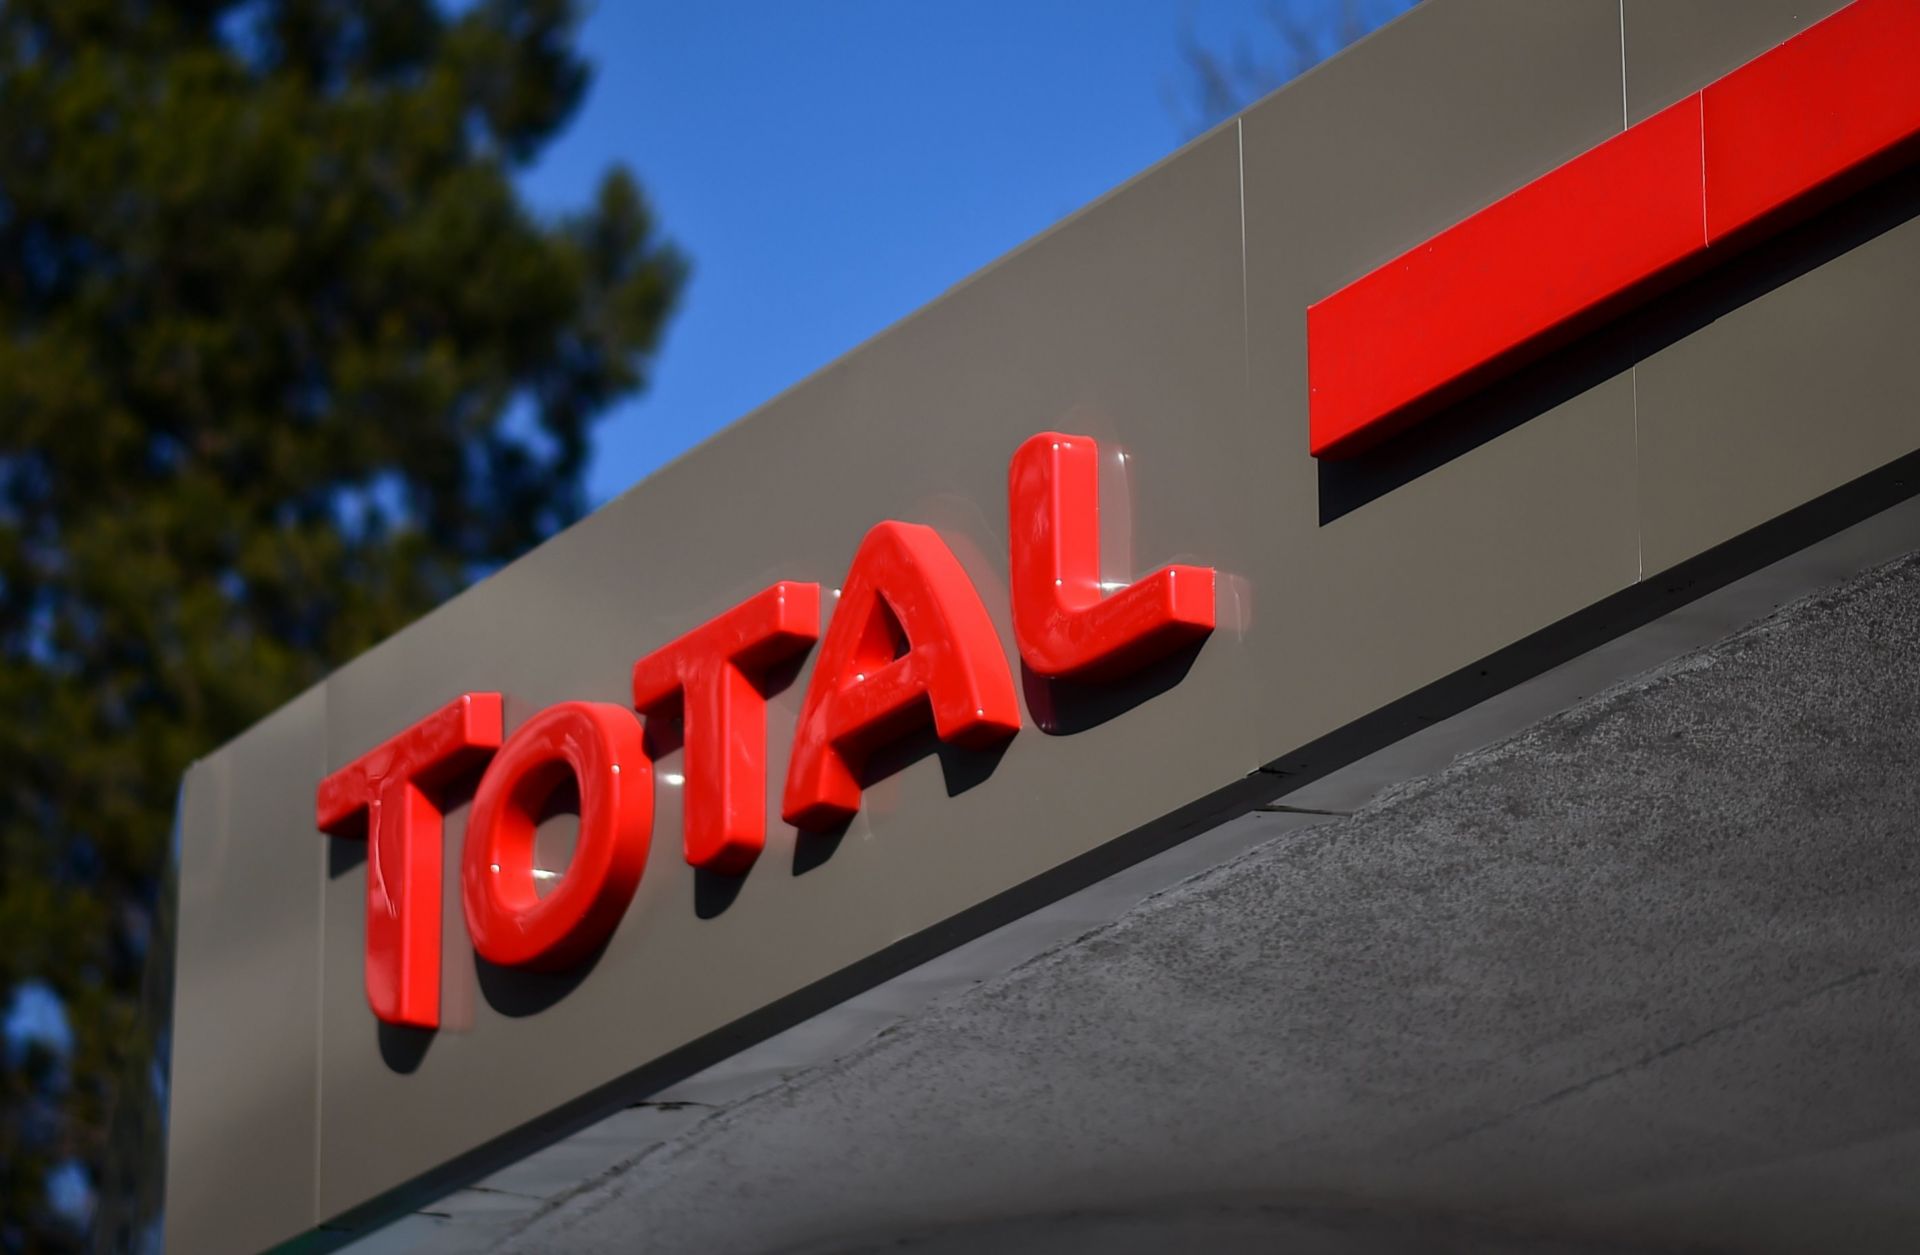 A photo of a sign of France's oil and energy company Total, taken in Mexico City on Jan. 17, 2018.